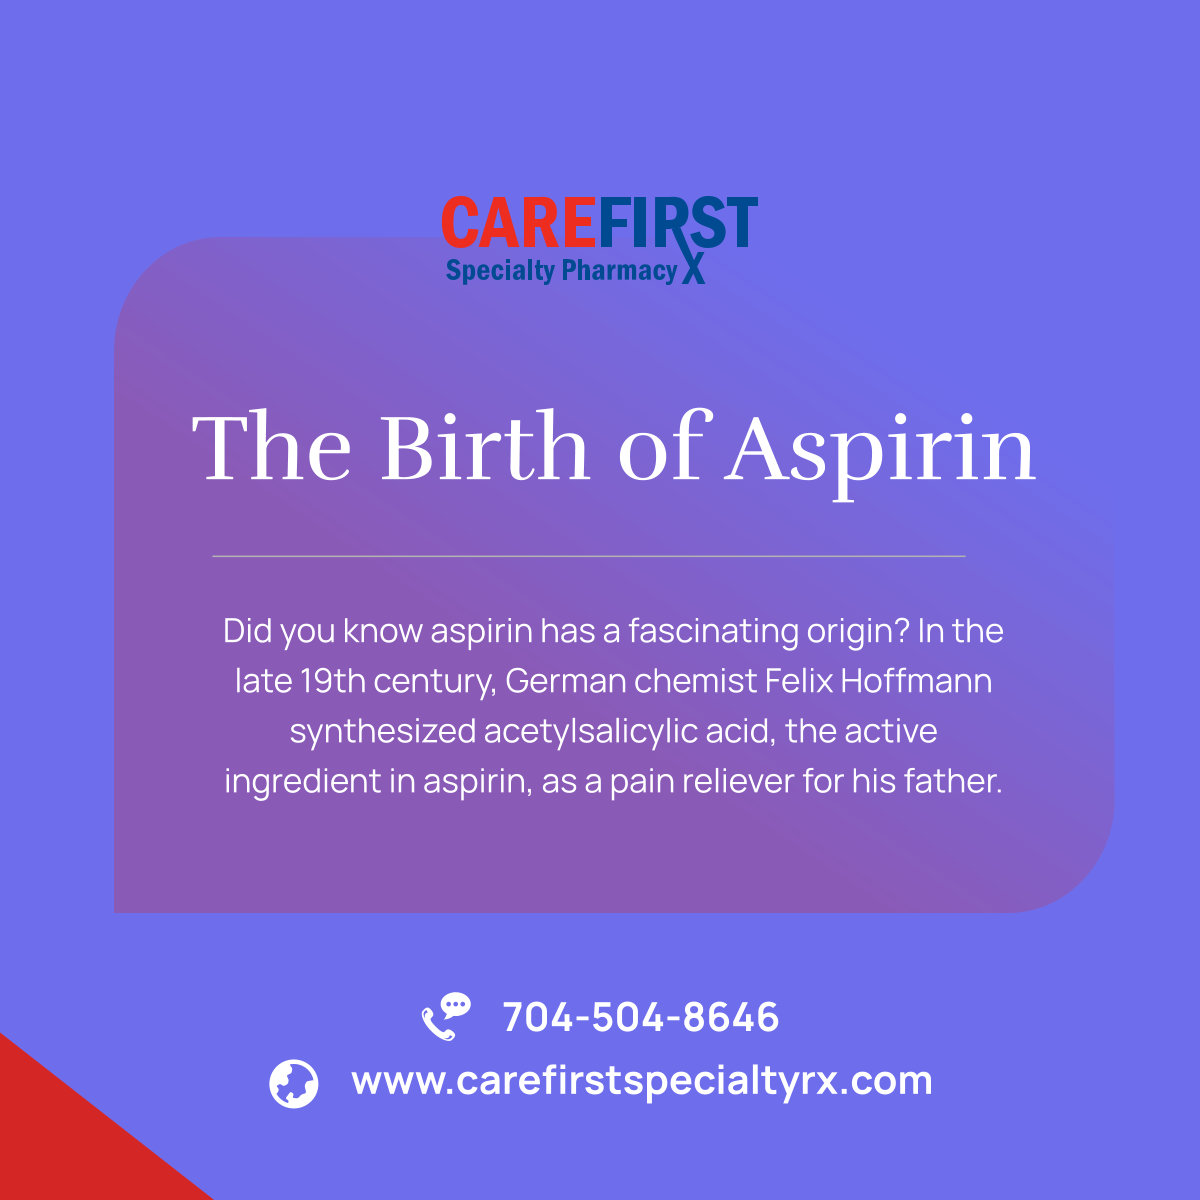 Dive into the late 19th-century journey with German chemist Felix Hoffmann, who crafted acetylsalicylic acid for his father's pain relief. 

#CharlotteNC #RetailPharmacy #AspirinHistory #PharmacyFacts #MedicationOrigins